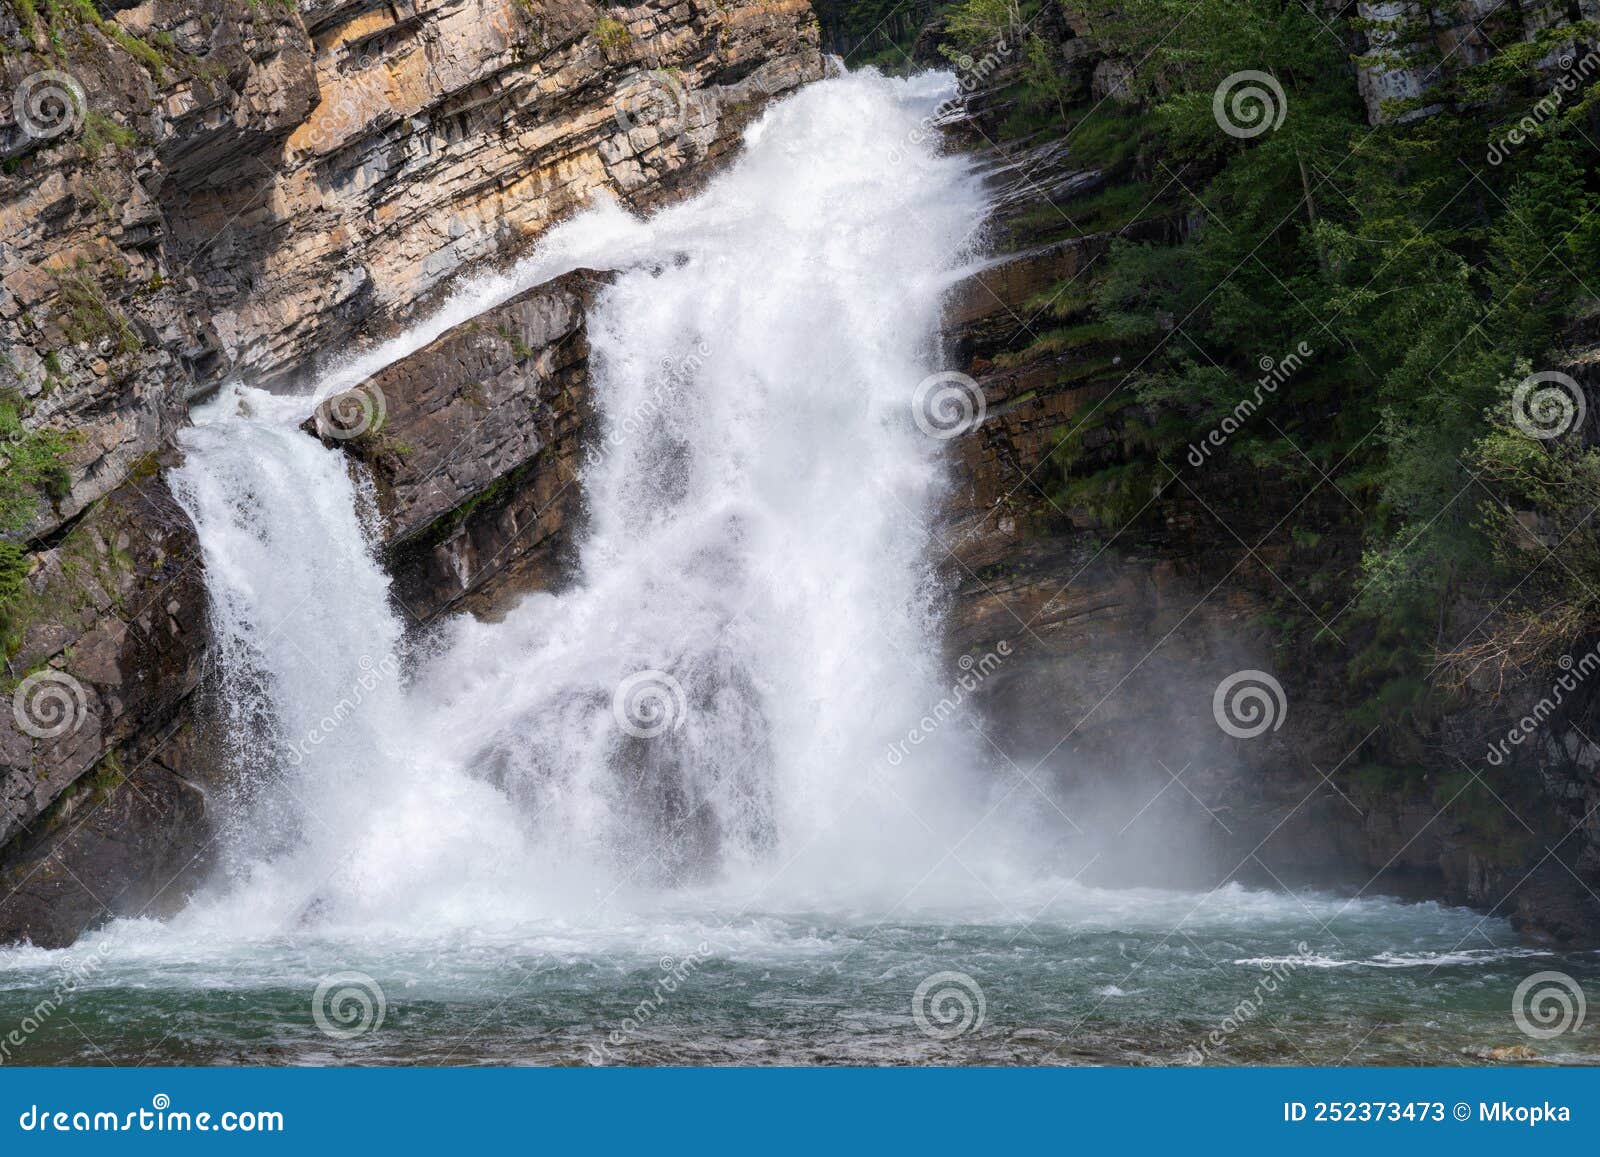 close up of the cameron falls waterfall in waterton lakes national park, canada